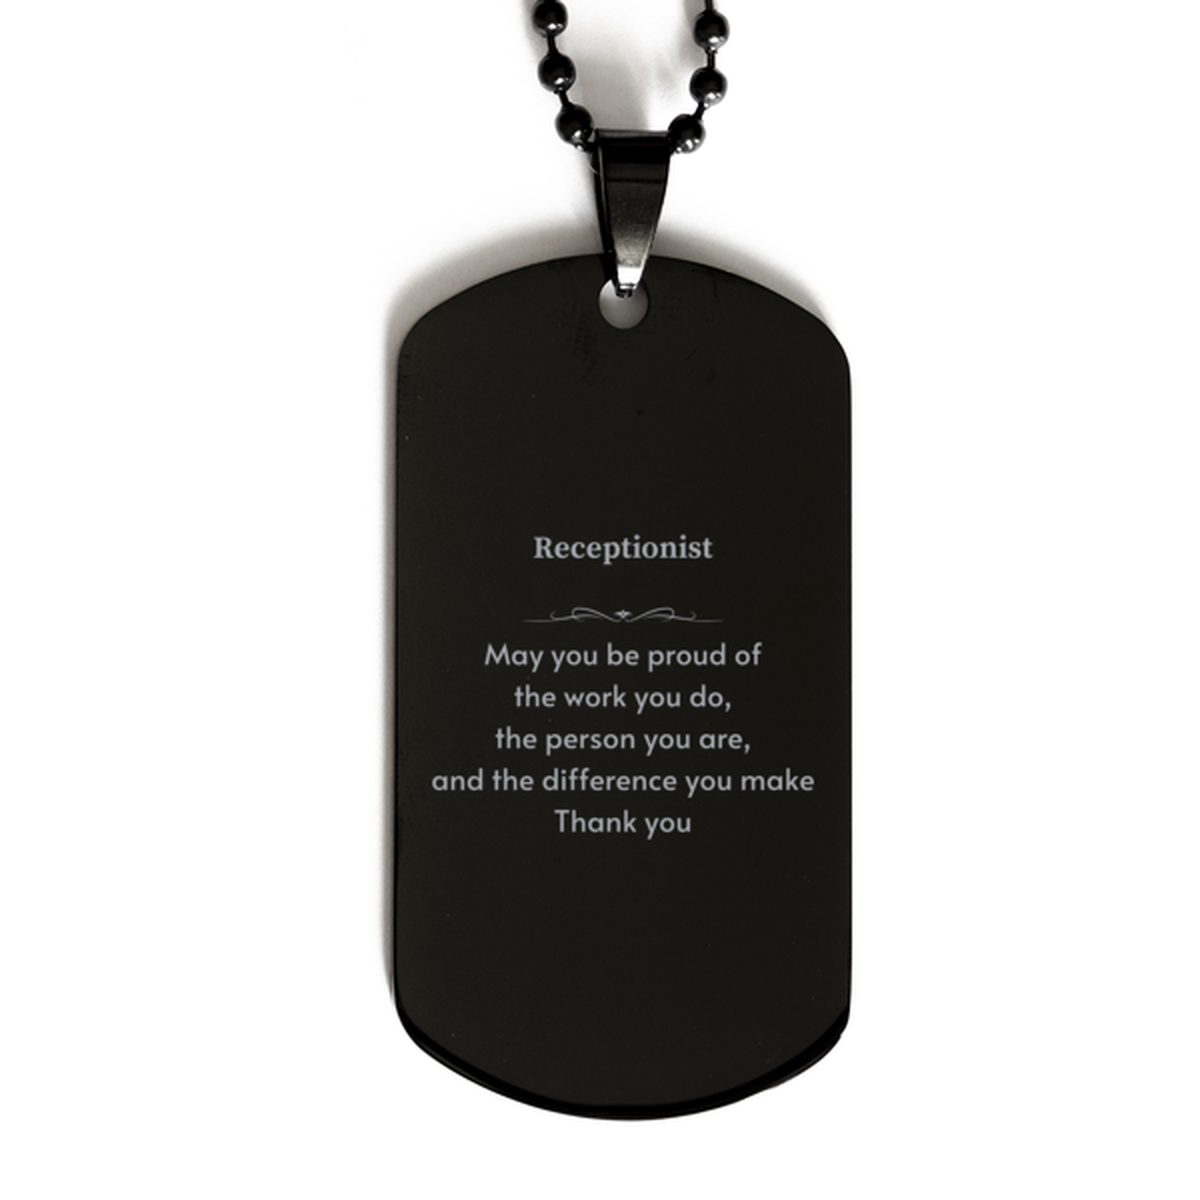 Heartwarming Black Dog Tag Retirement Coworkers Gifts for Receptionist, Receptionist May You be proud of the work you do, the person you are Gifts for Boss Men Women Friends